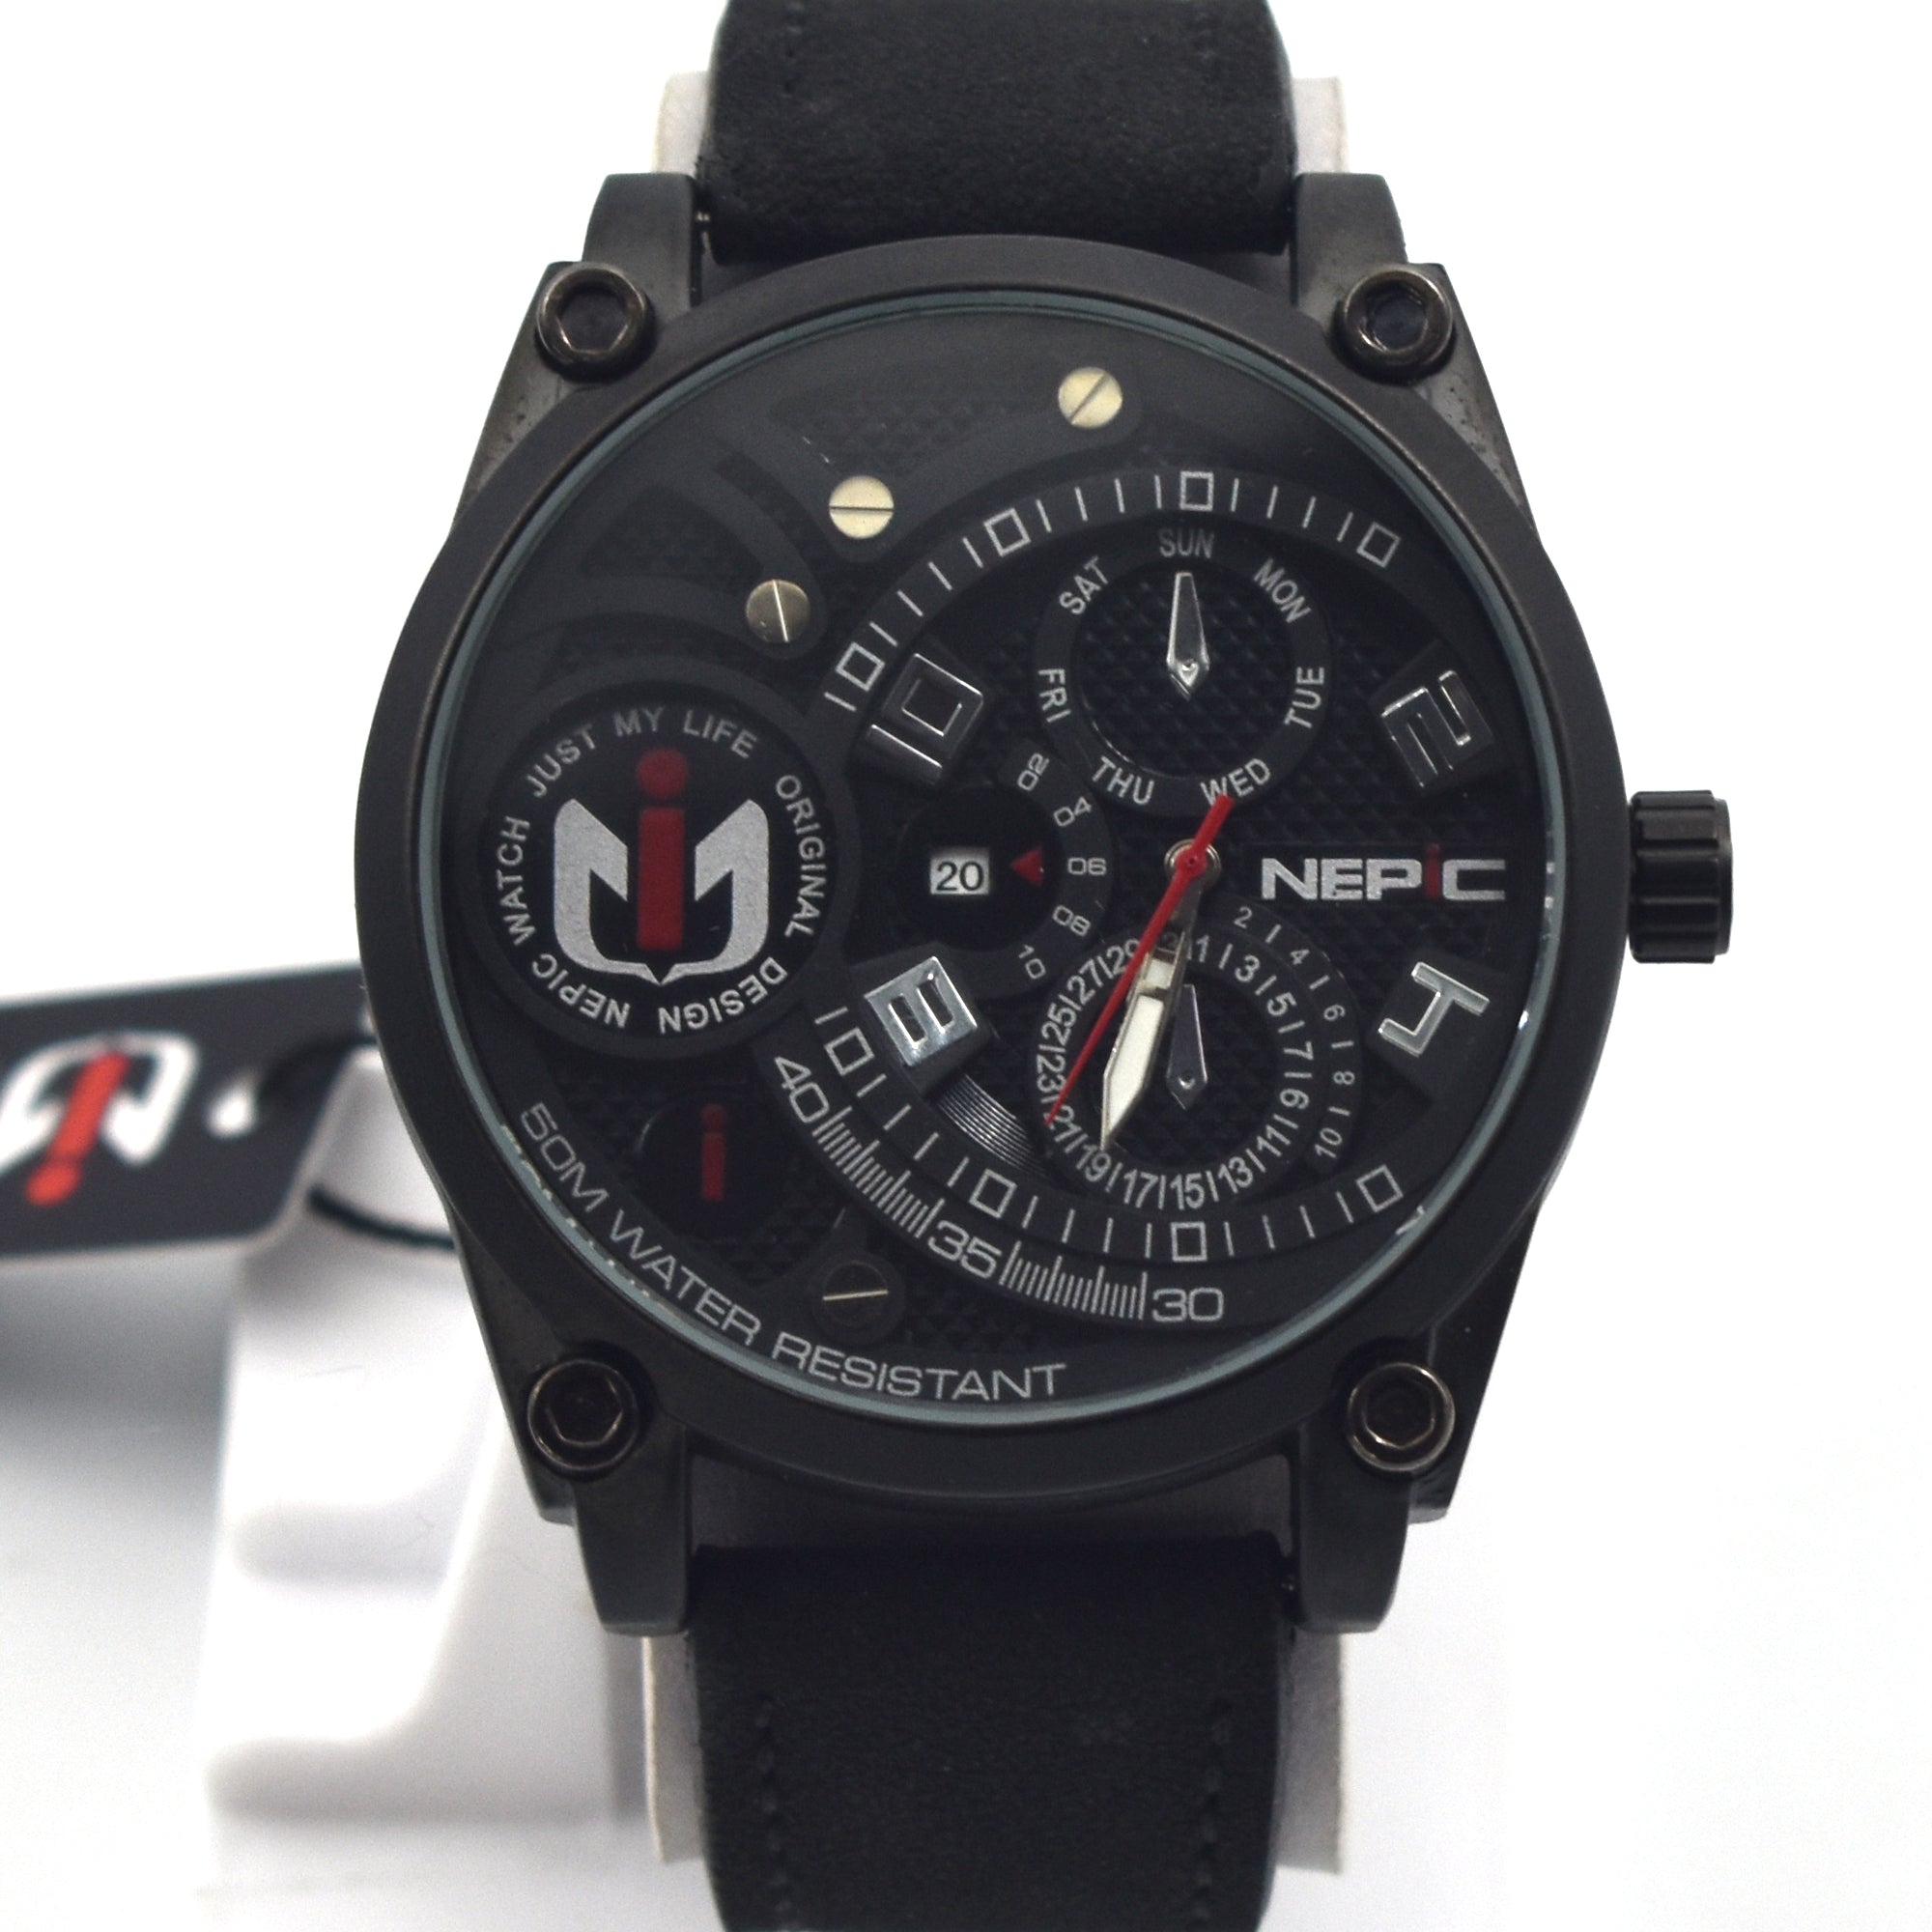 Buy *Nepic* Men's Watch online from FB Brand Collection